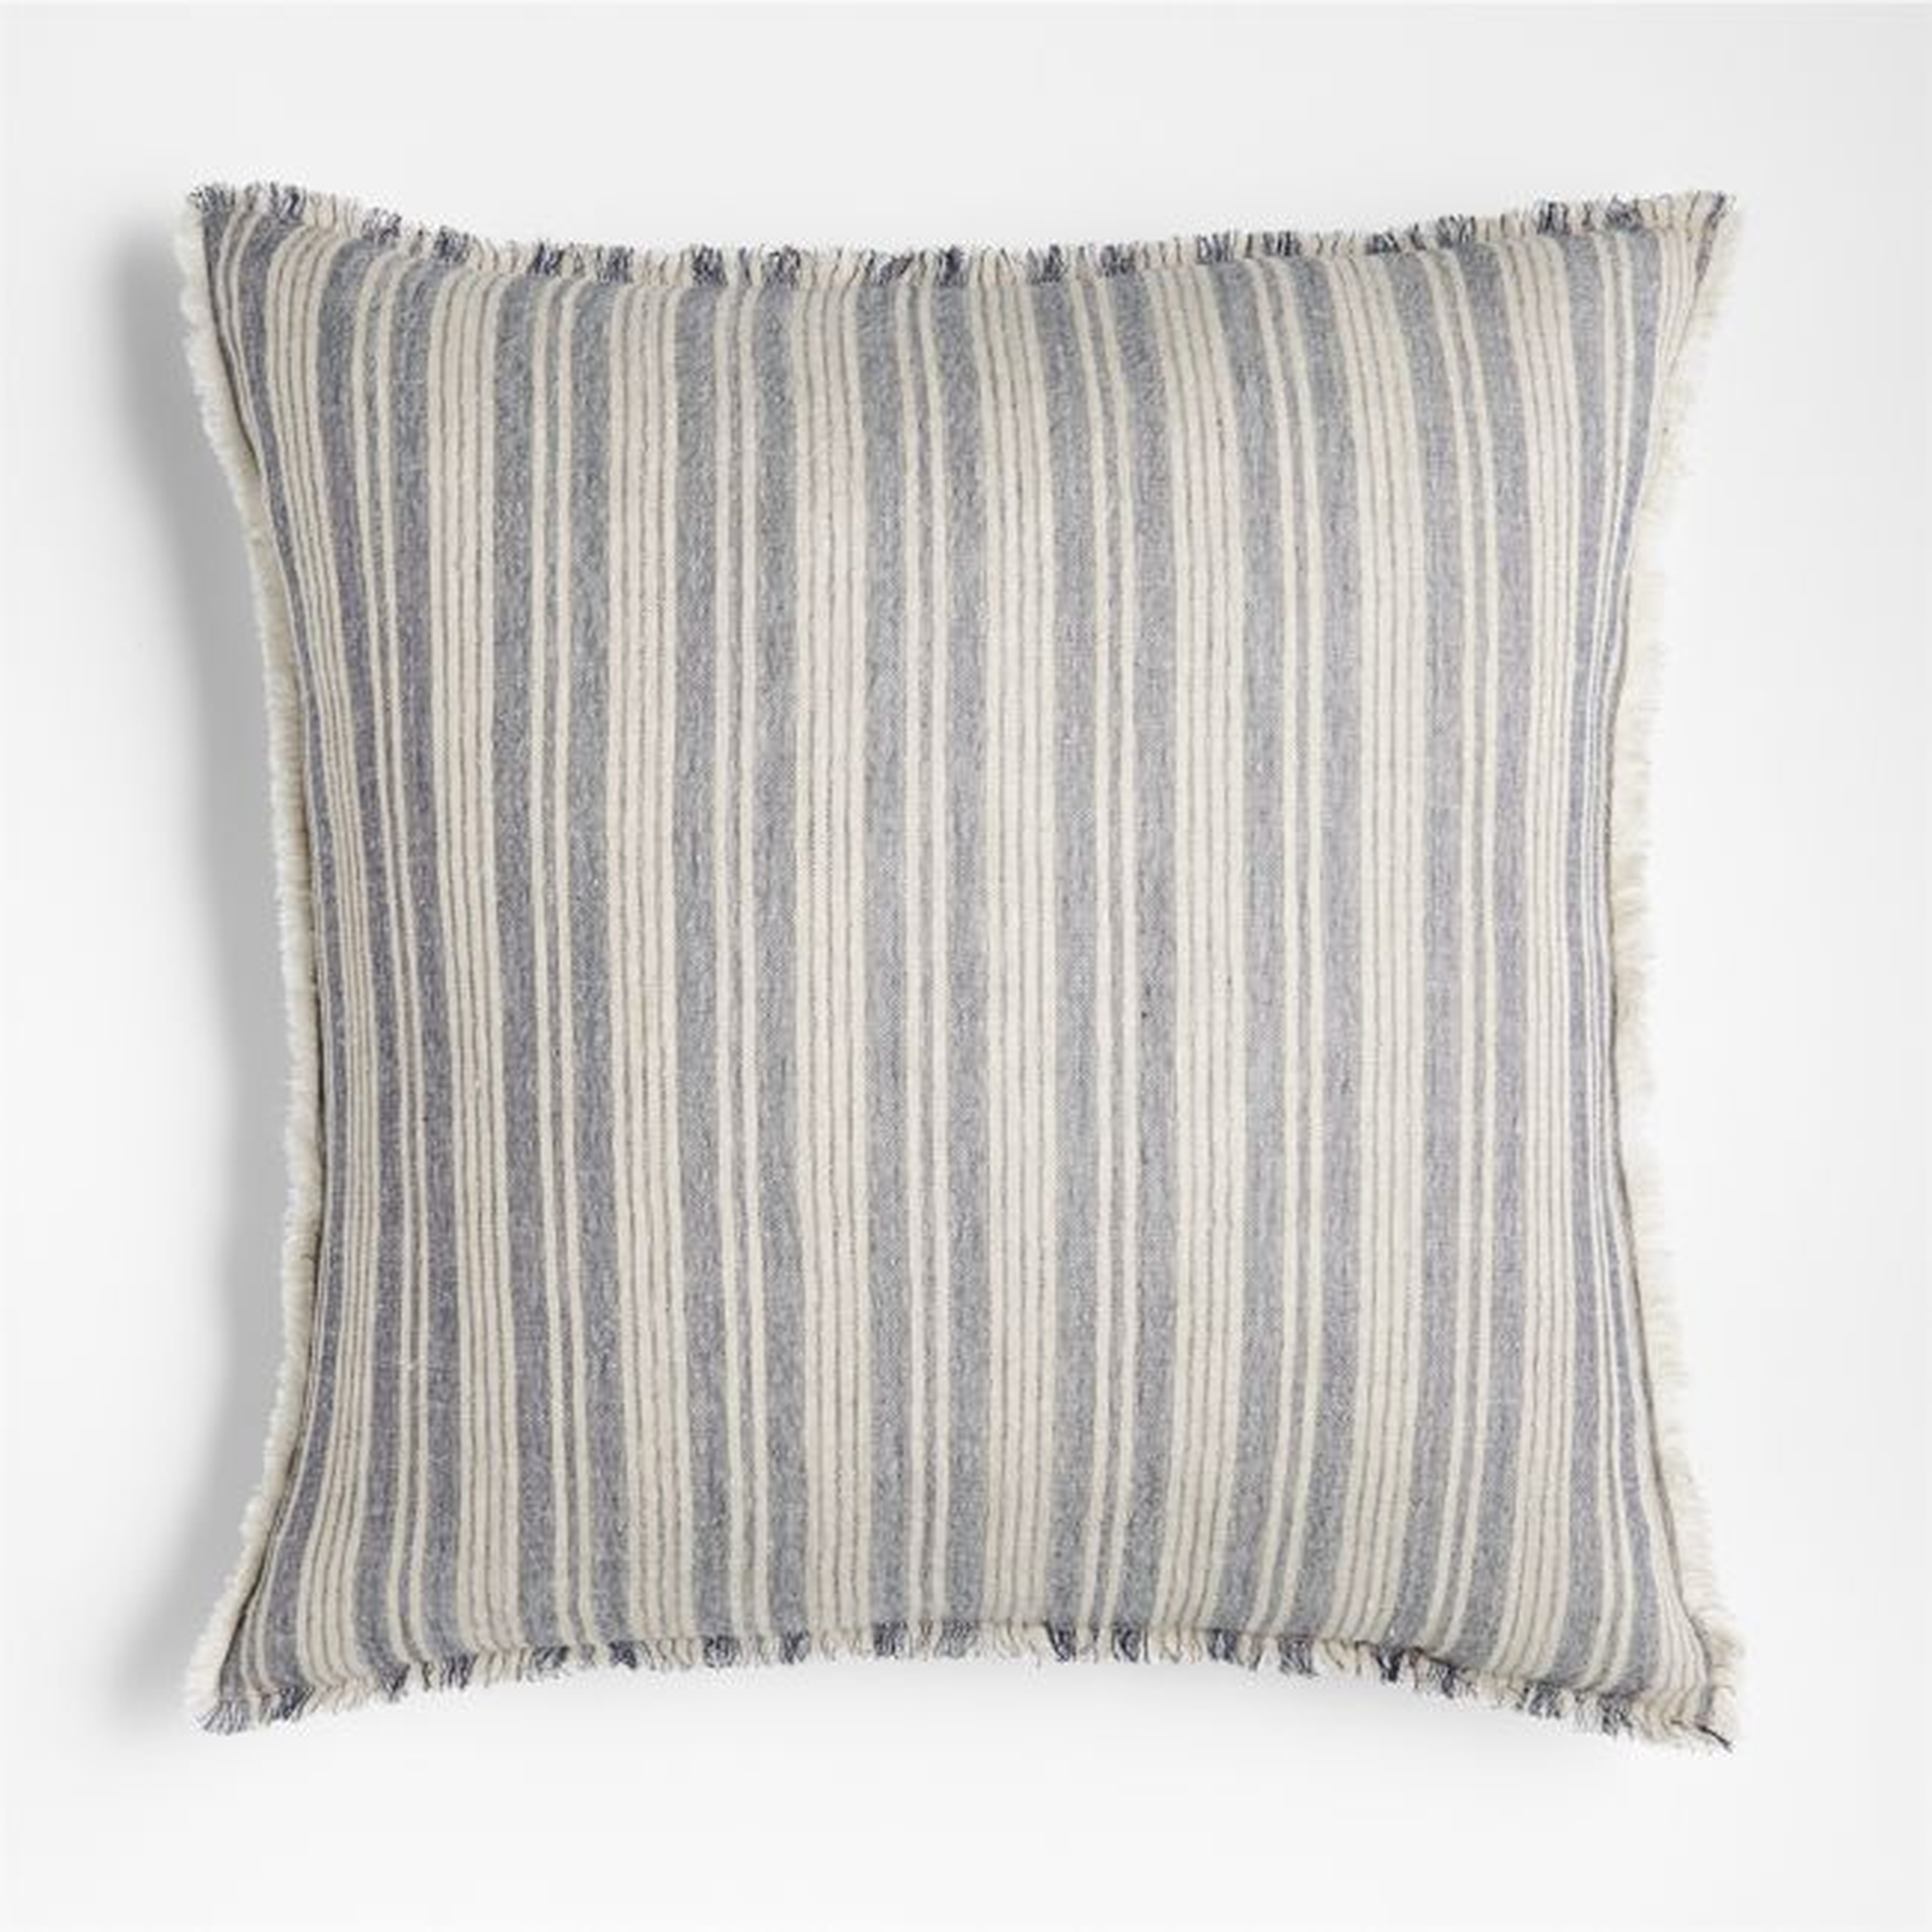 Arla 23"x23" Eyelash Striped Blue Throw Pillow Cover with Down-Alternative Insert - Crate and Barrel